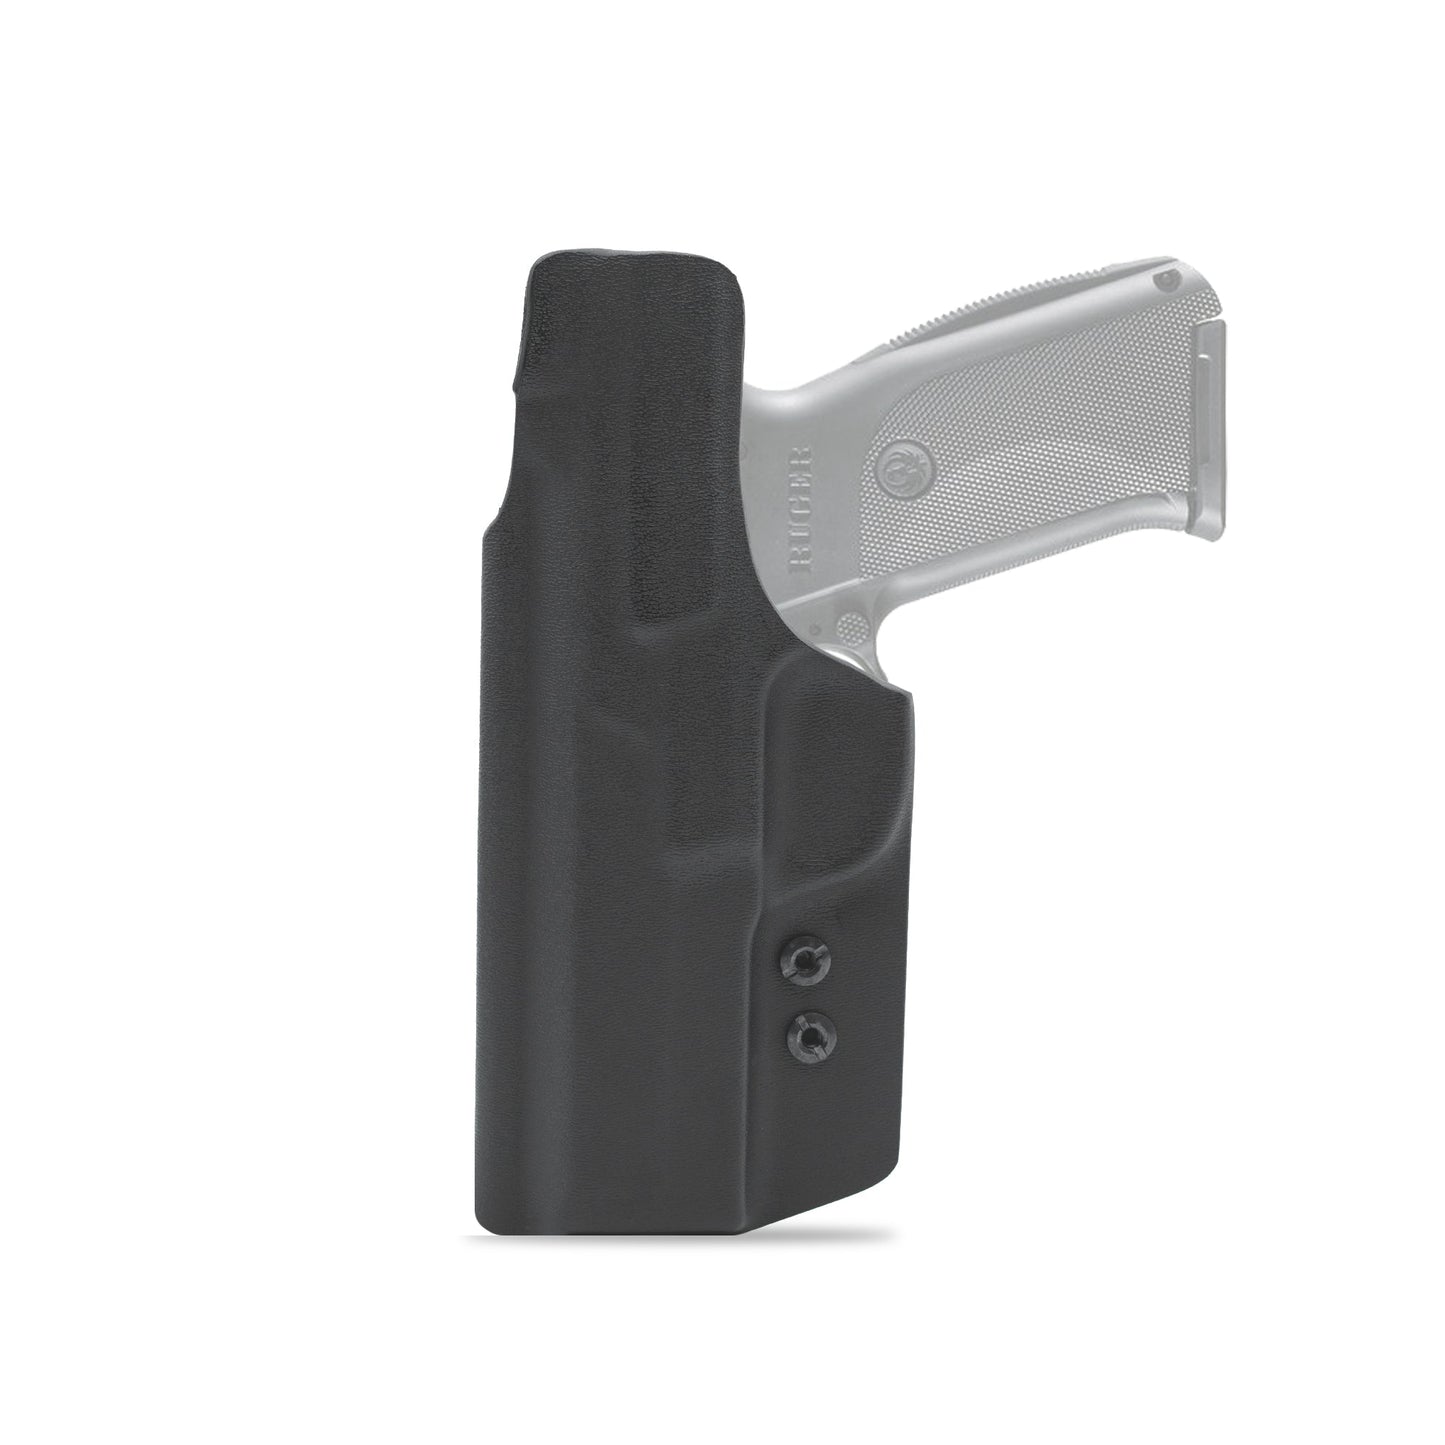 IWB Holster for the Ruger SR9 Clip & Carry